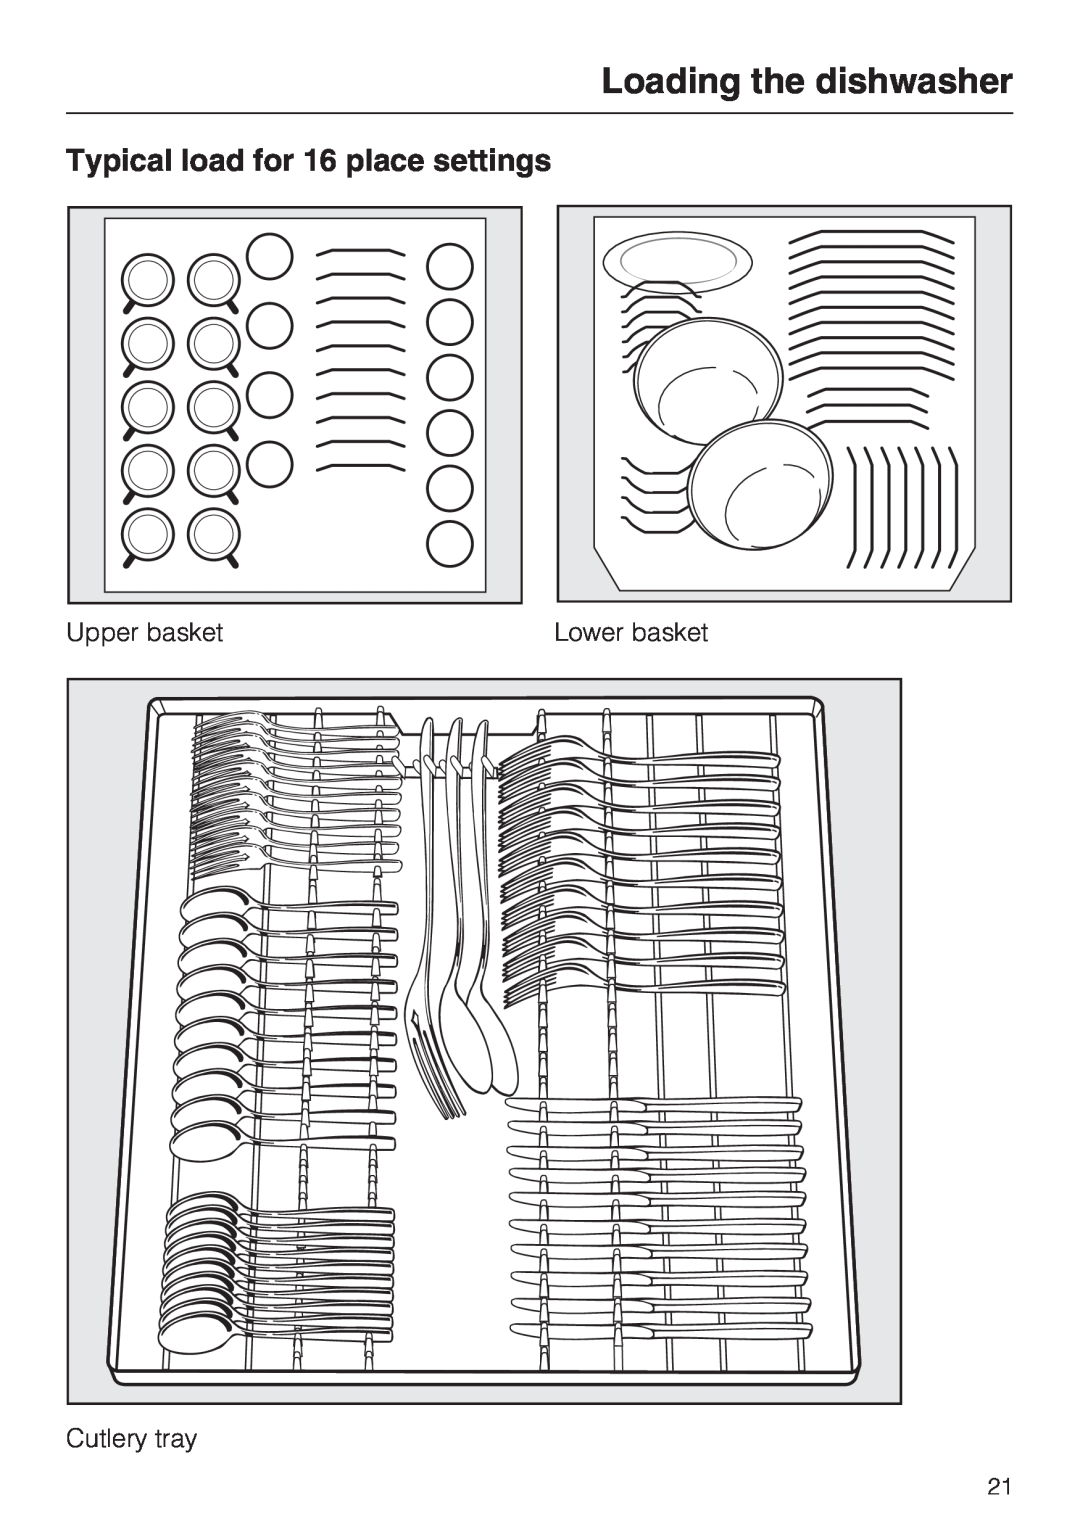 Miele G 5815, G 5810 manual Typical load for 16 place settings, Loading the dishwasher 